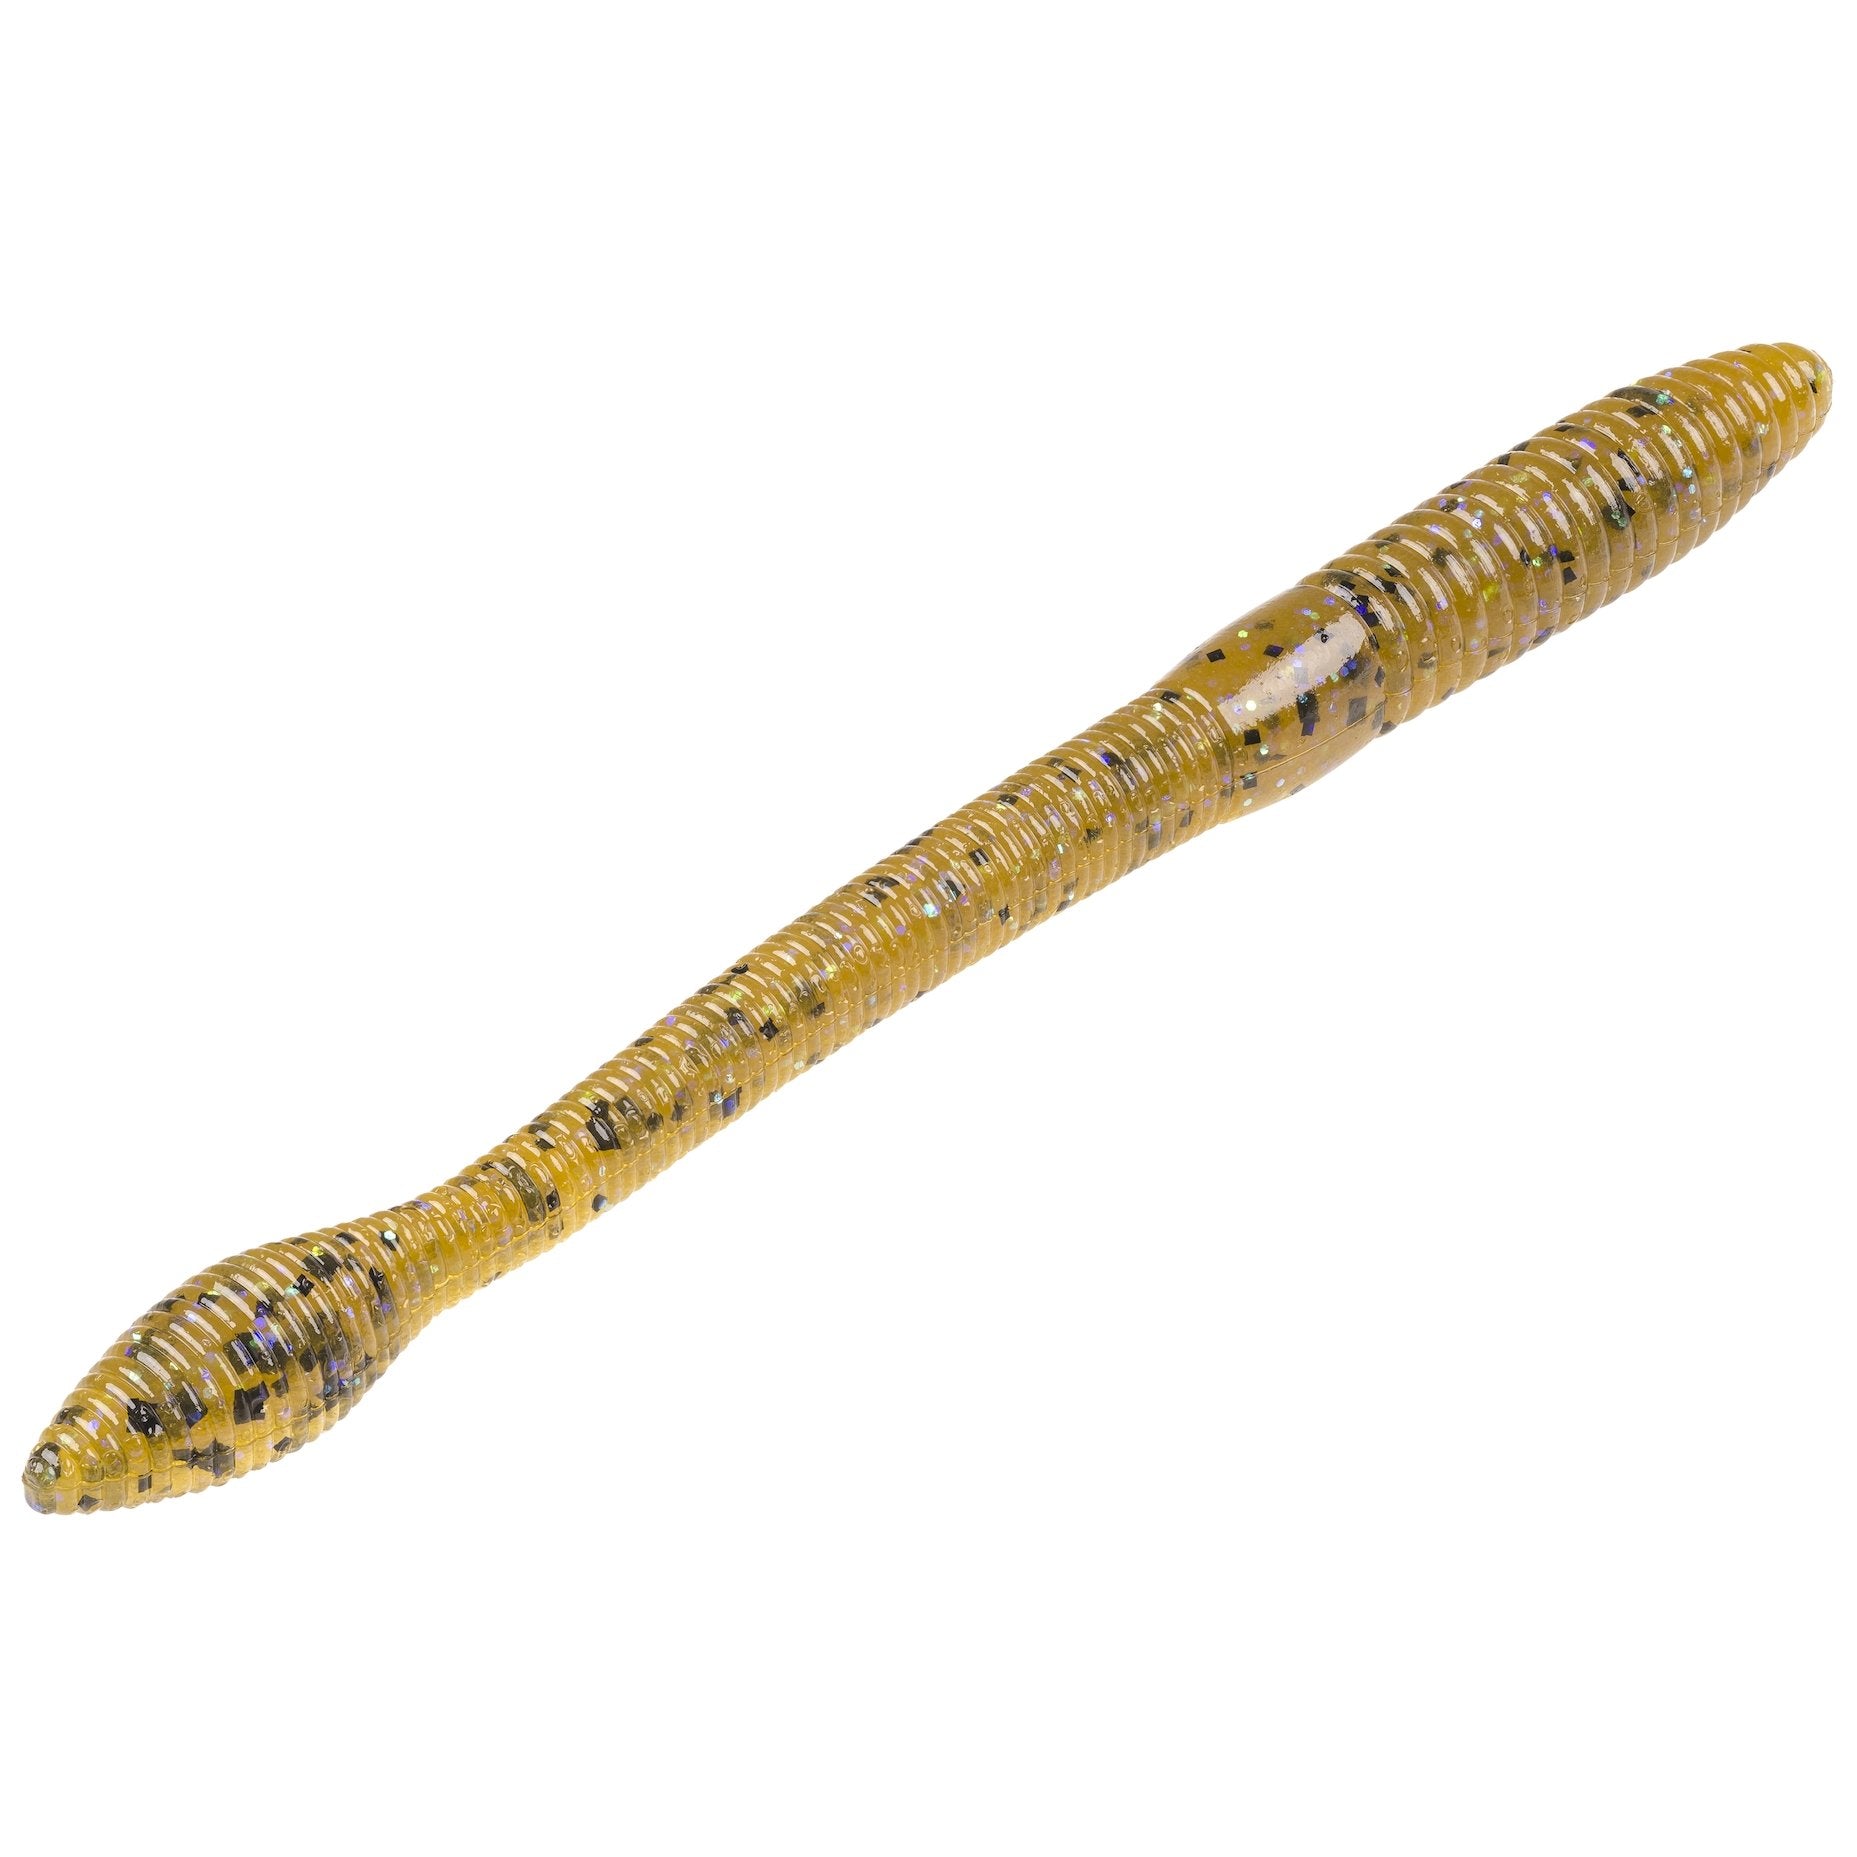 Strike King KVD Fat Baby Finesse Worm - Hamilton Bait and Tackle